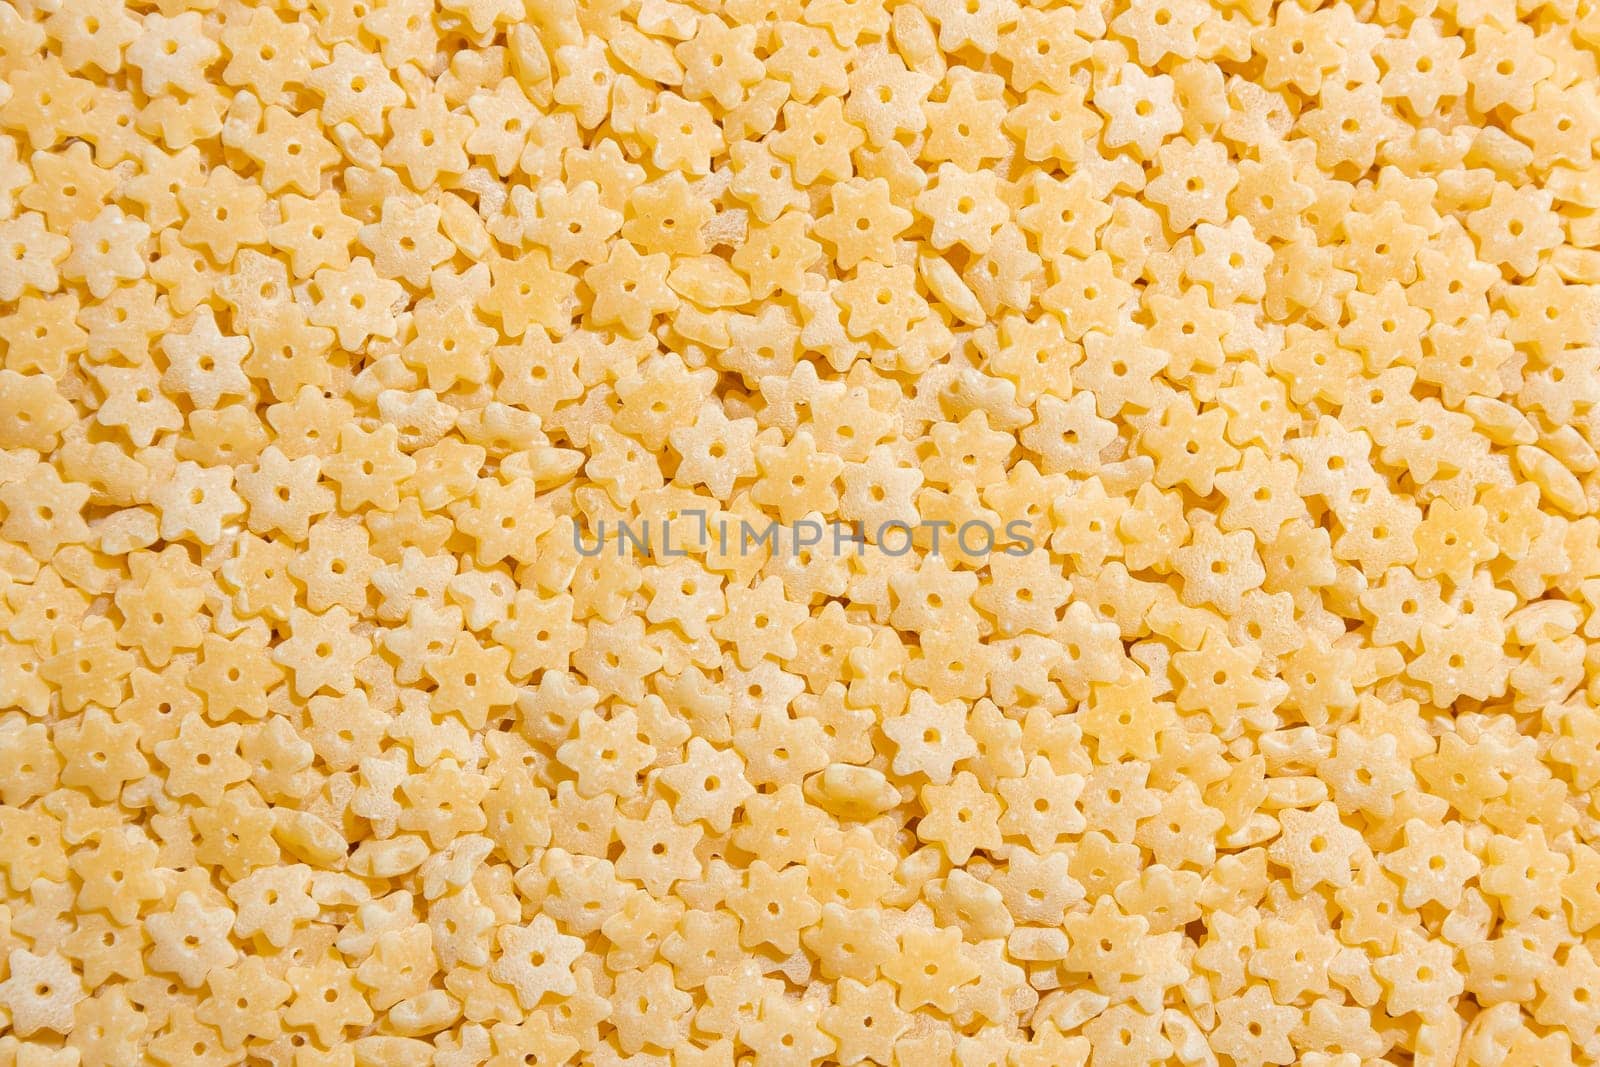 Uncooked Stelline Pasta: A Culinary Canvas of Stelline Macaroni, Creating a Lively and Textured Background for Gourmet Cooking. Dry Pasta. Raw Macaroni - Top View, Flat Lay